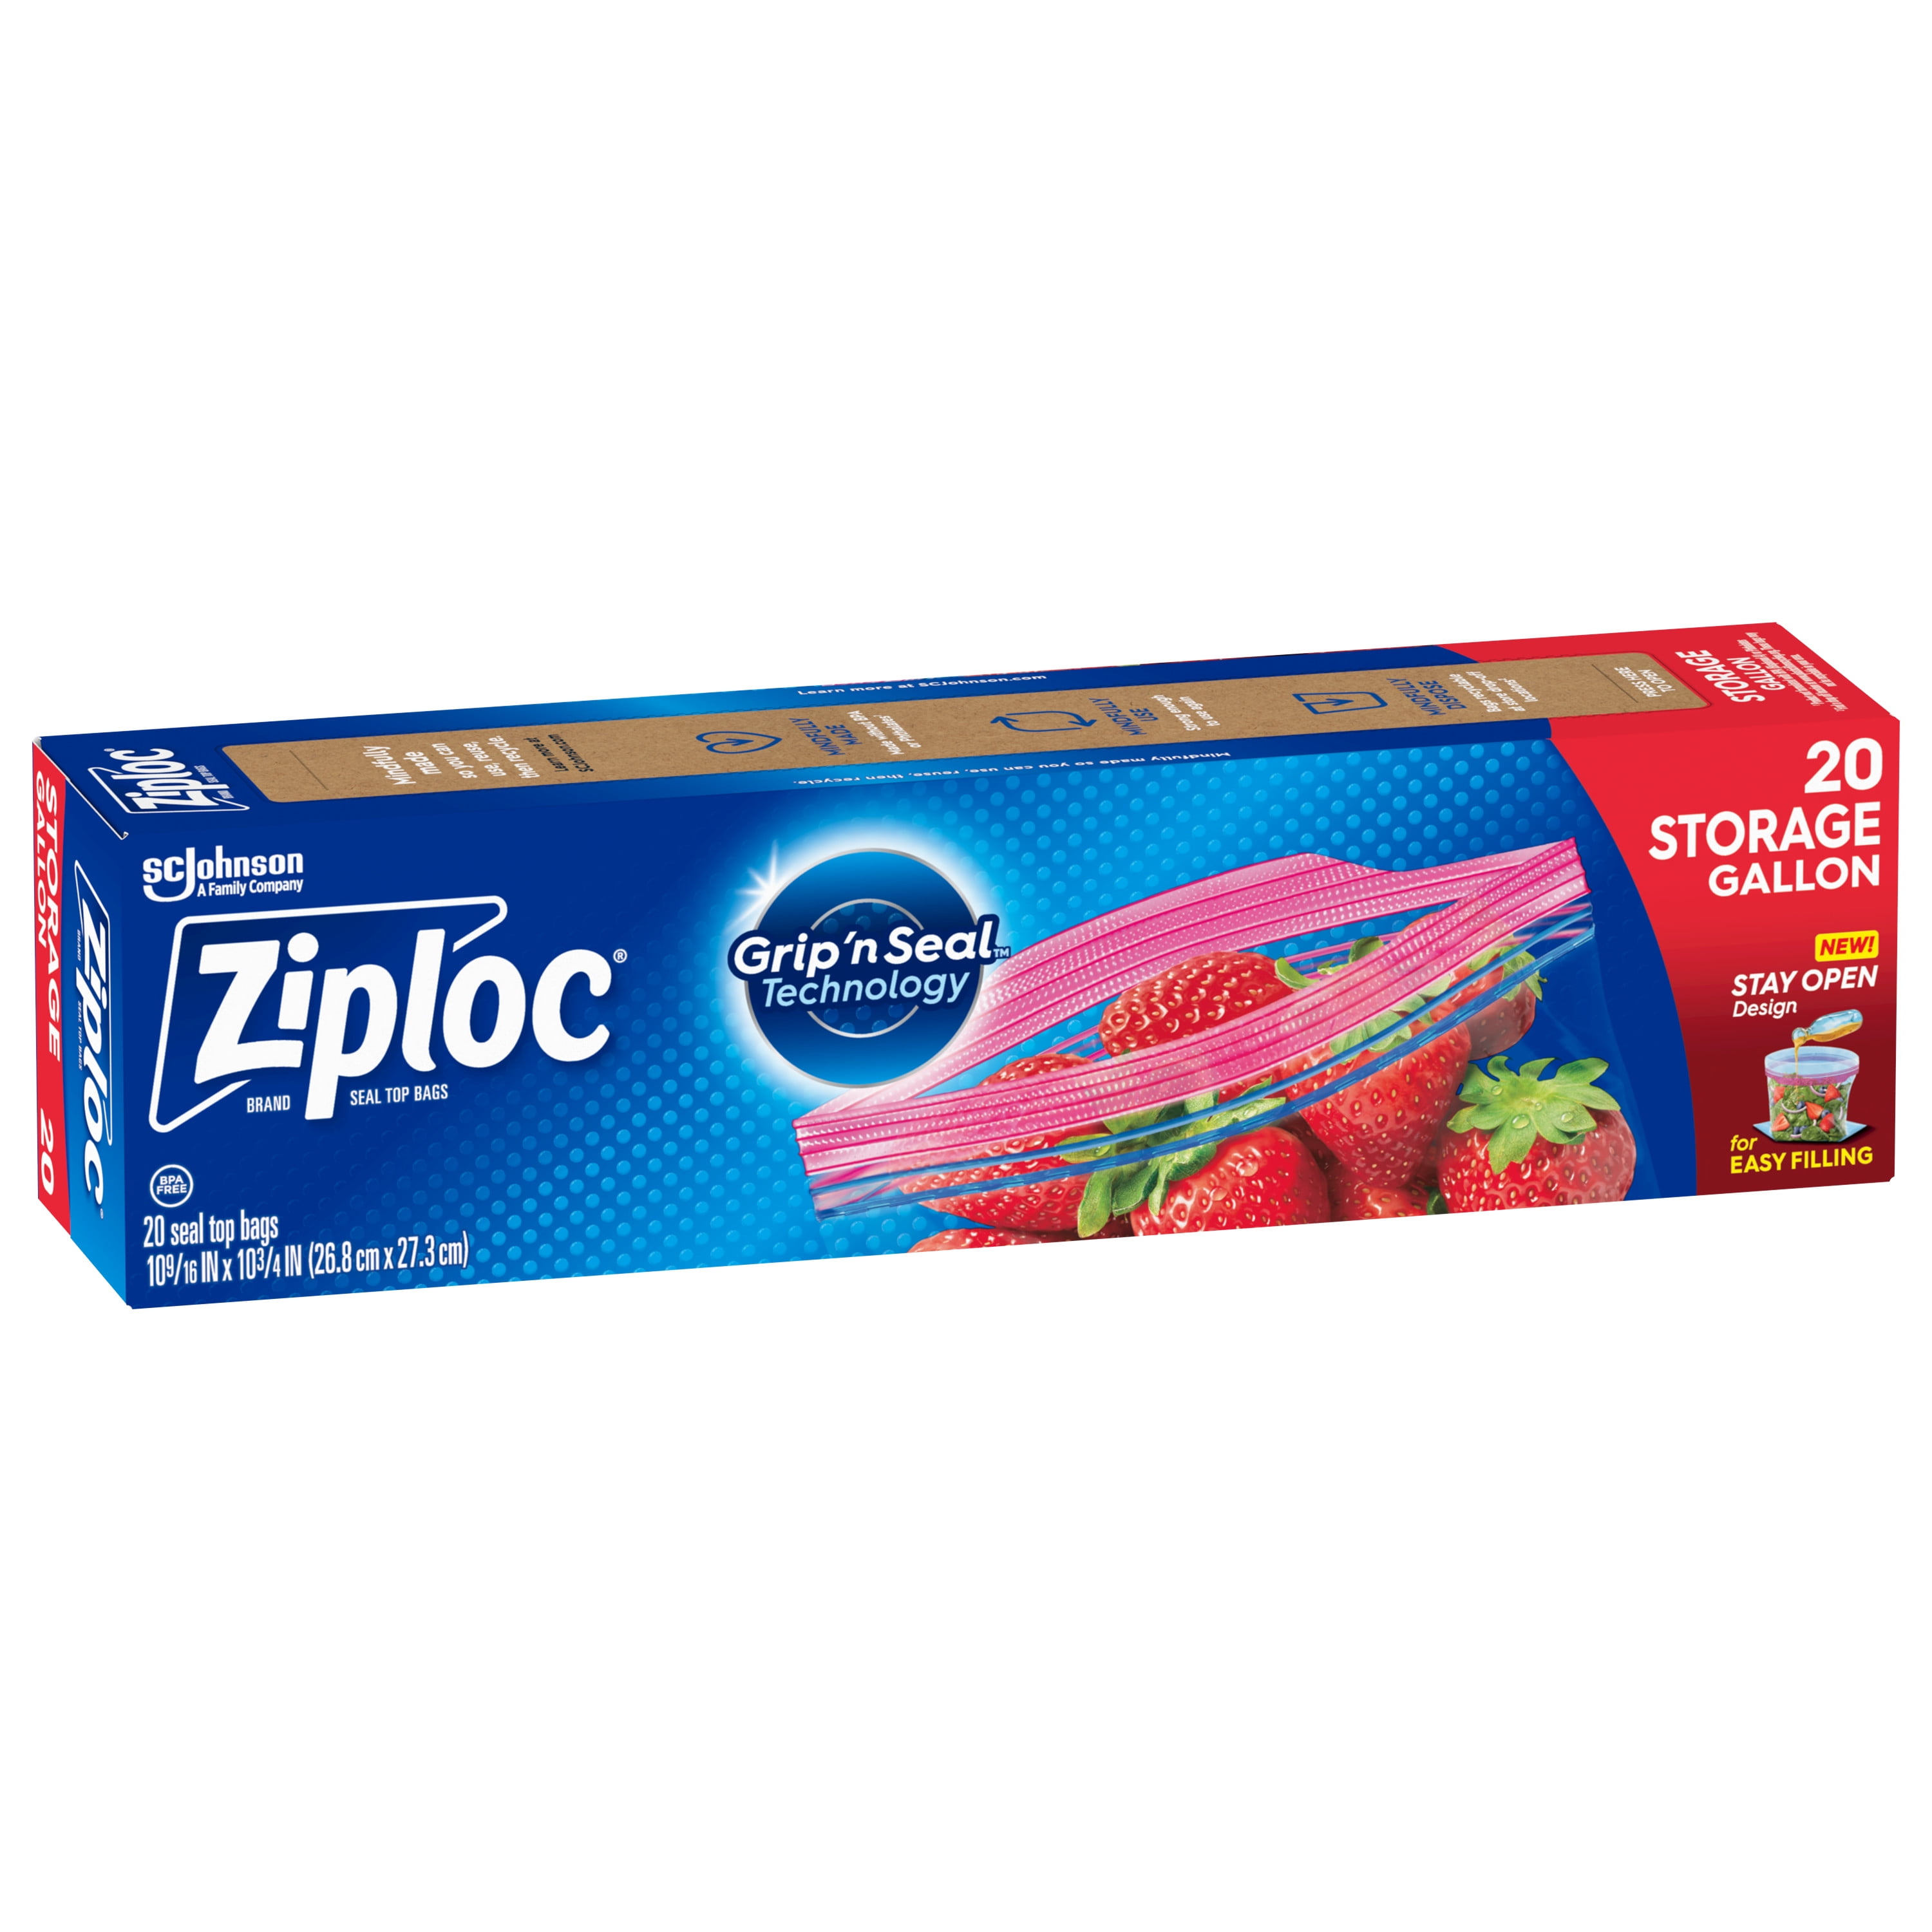 ZiplocÆ Brand Storage Bags with Grip 'n Seal Technology, Quart, 25 Count -  DroneUp Delivery